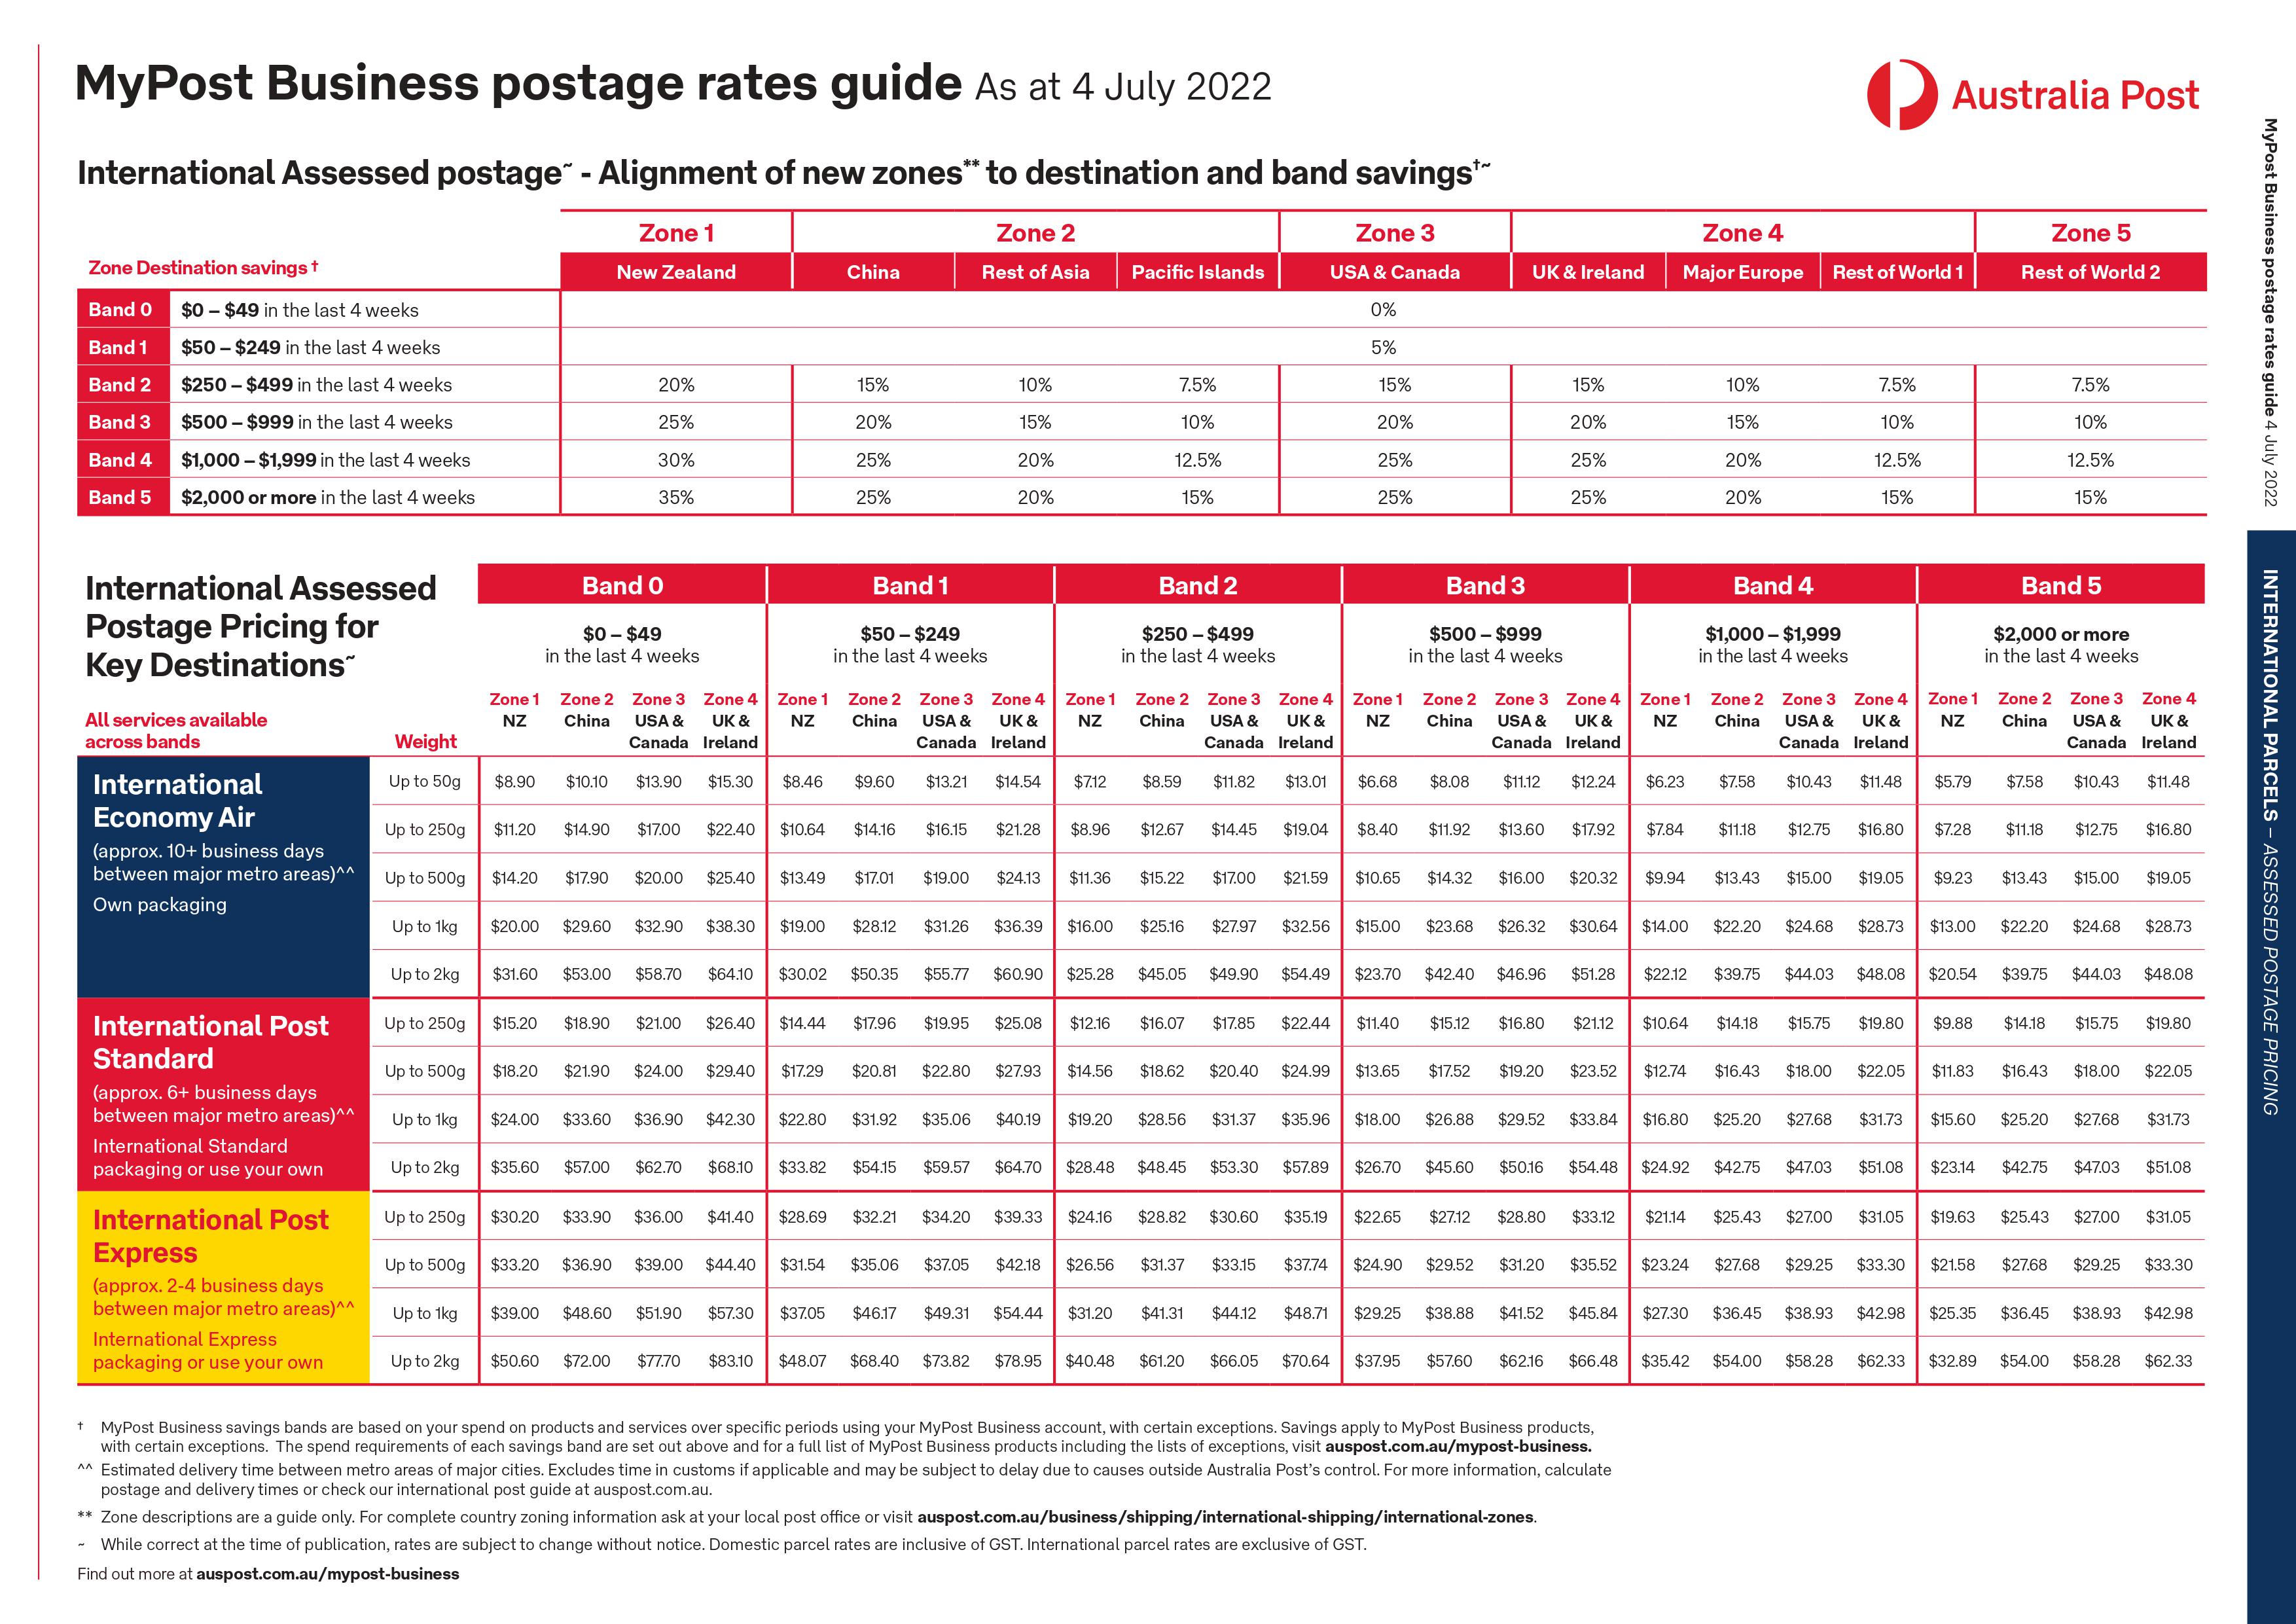 Shipping rates for international parcels